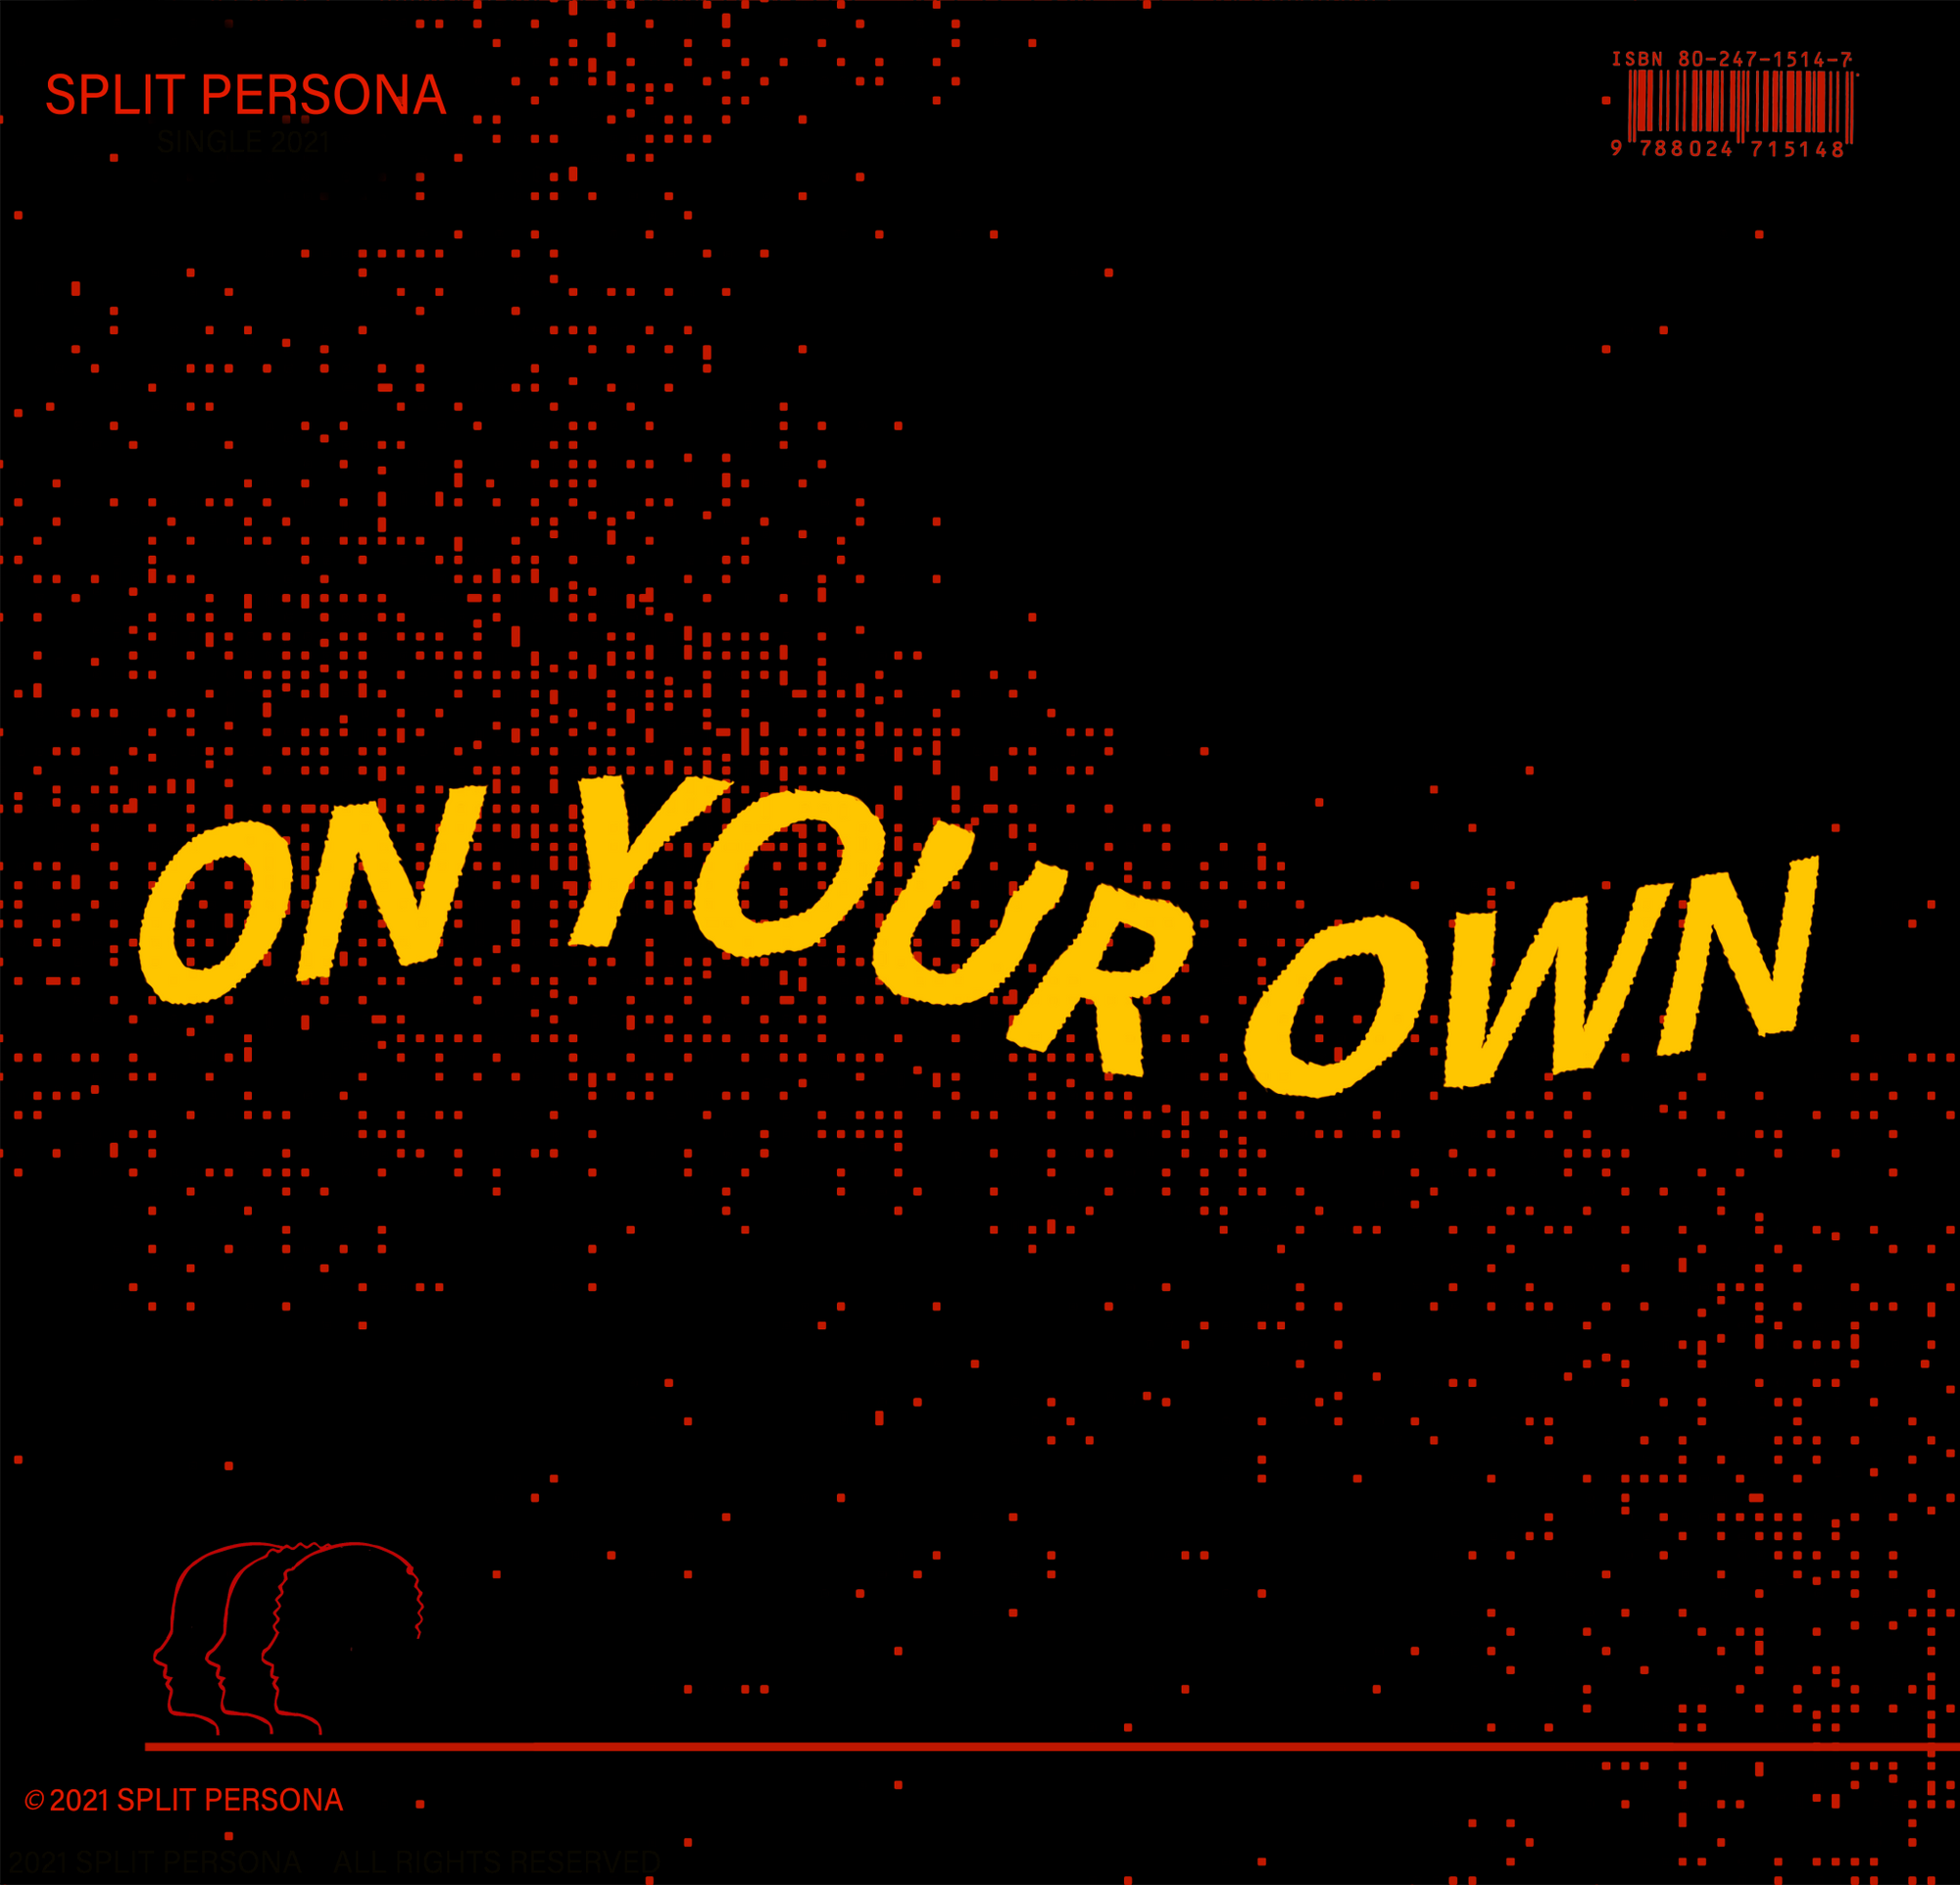 Split Persona – ‘On Your Own’